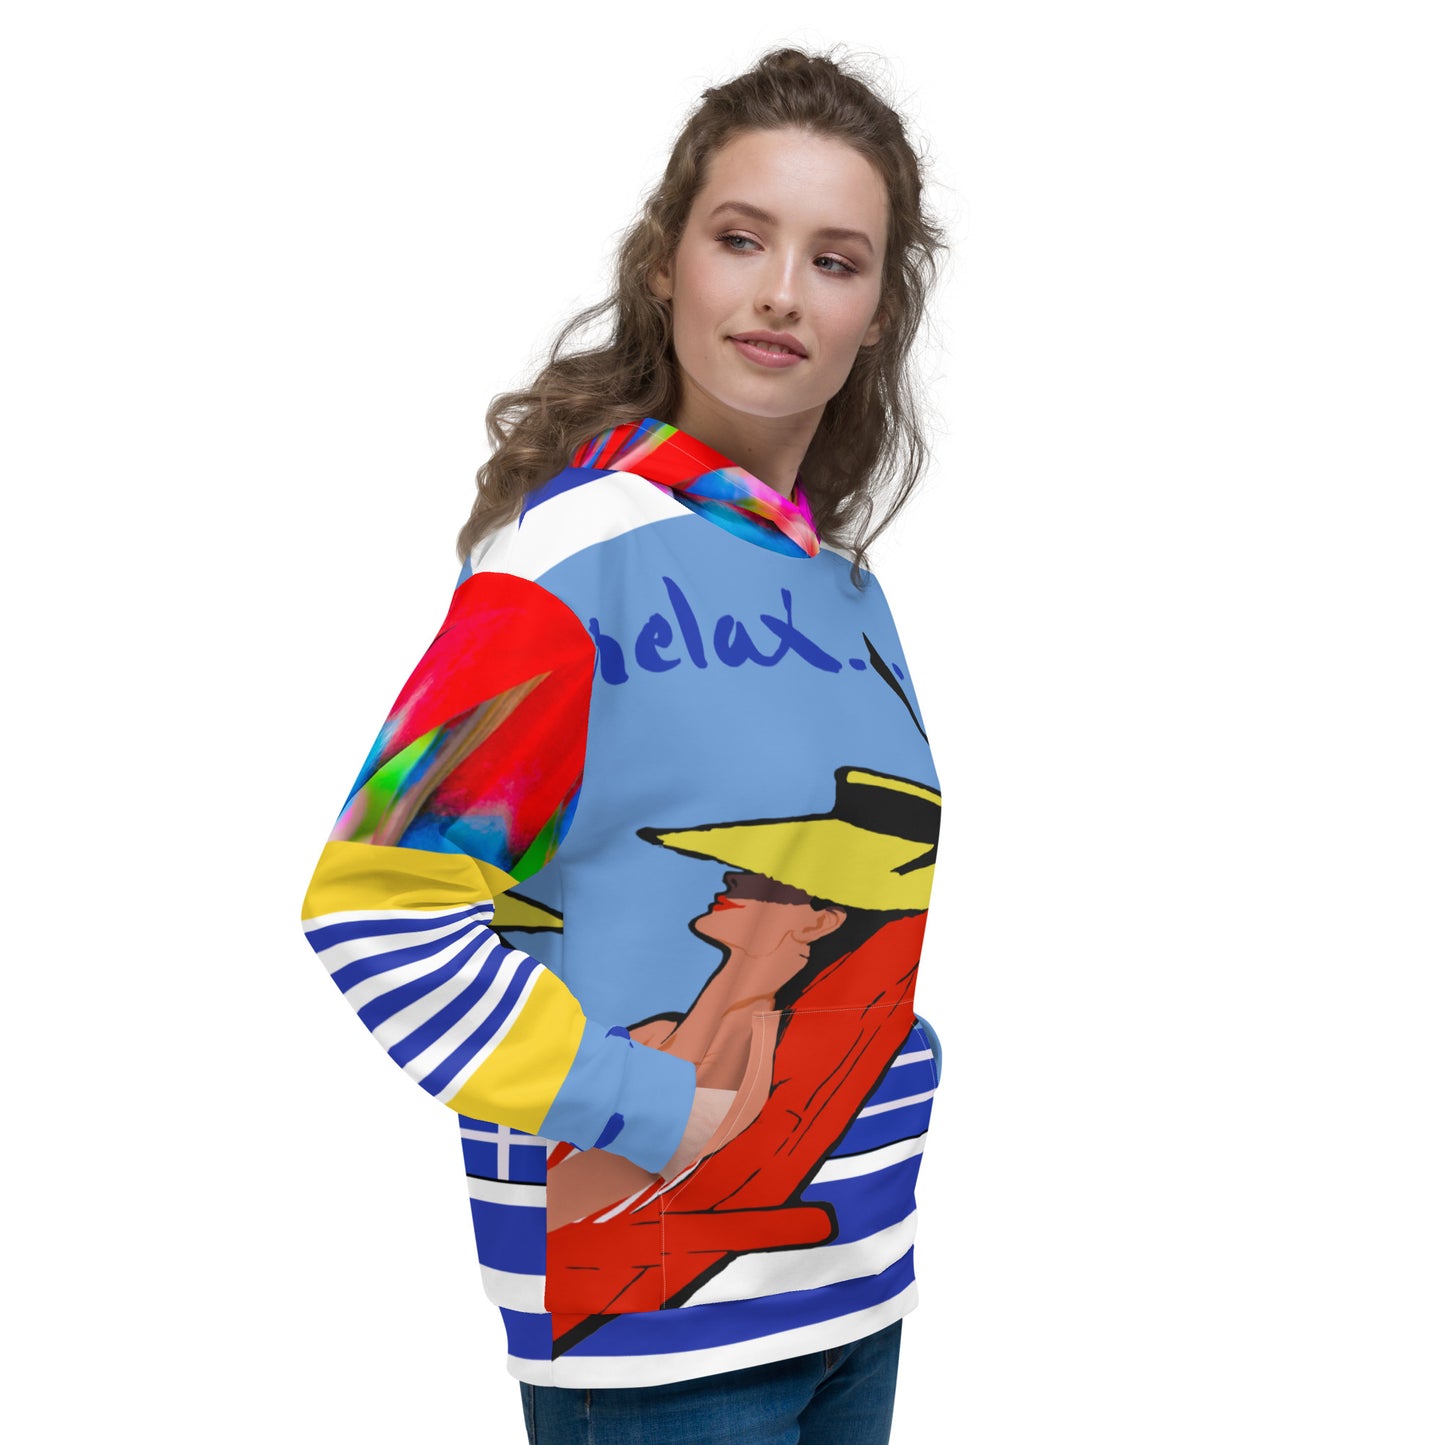 Relax Go To IT! Vacation-Themed Unisex Hoody